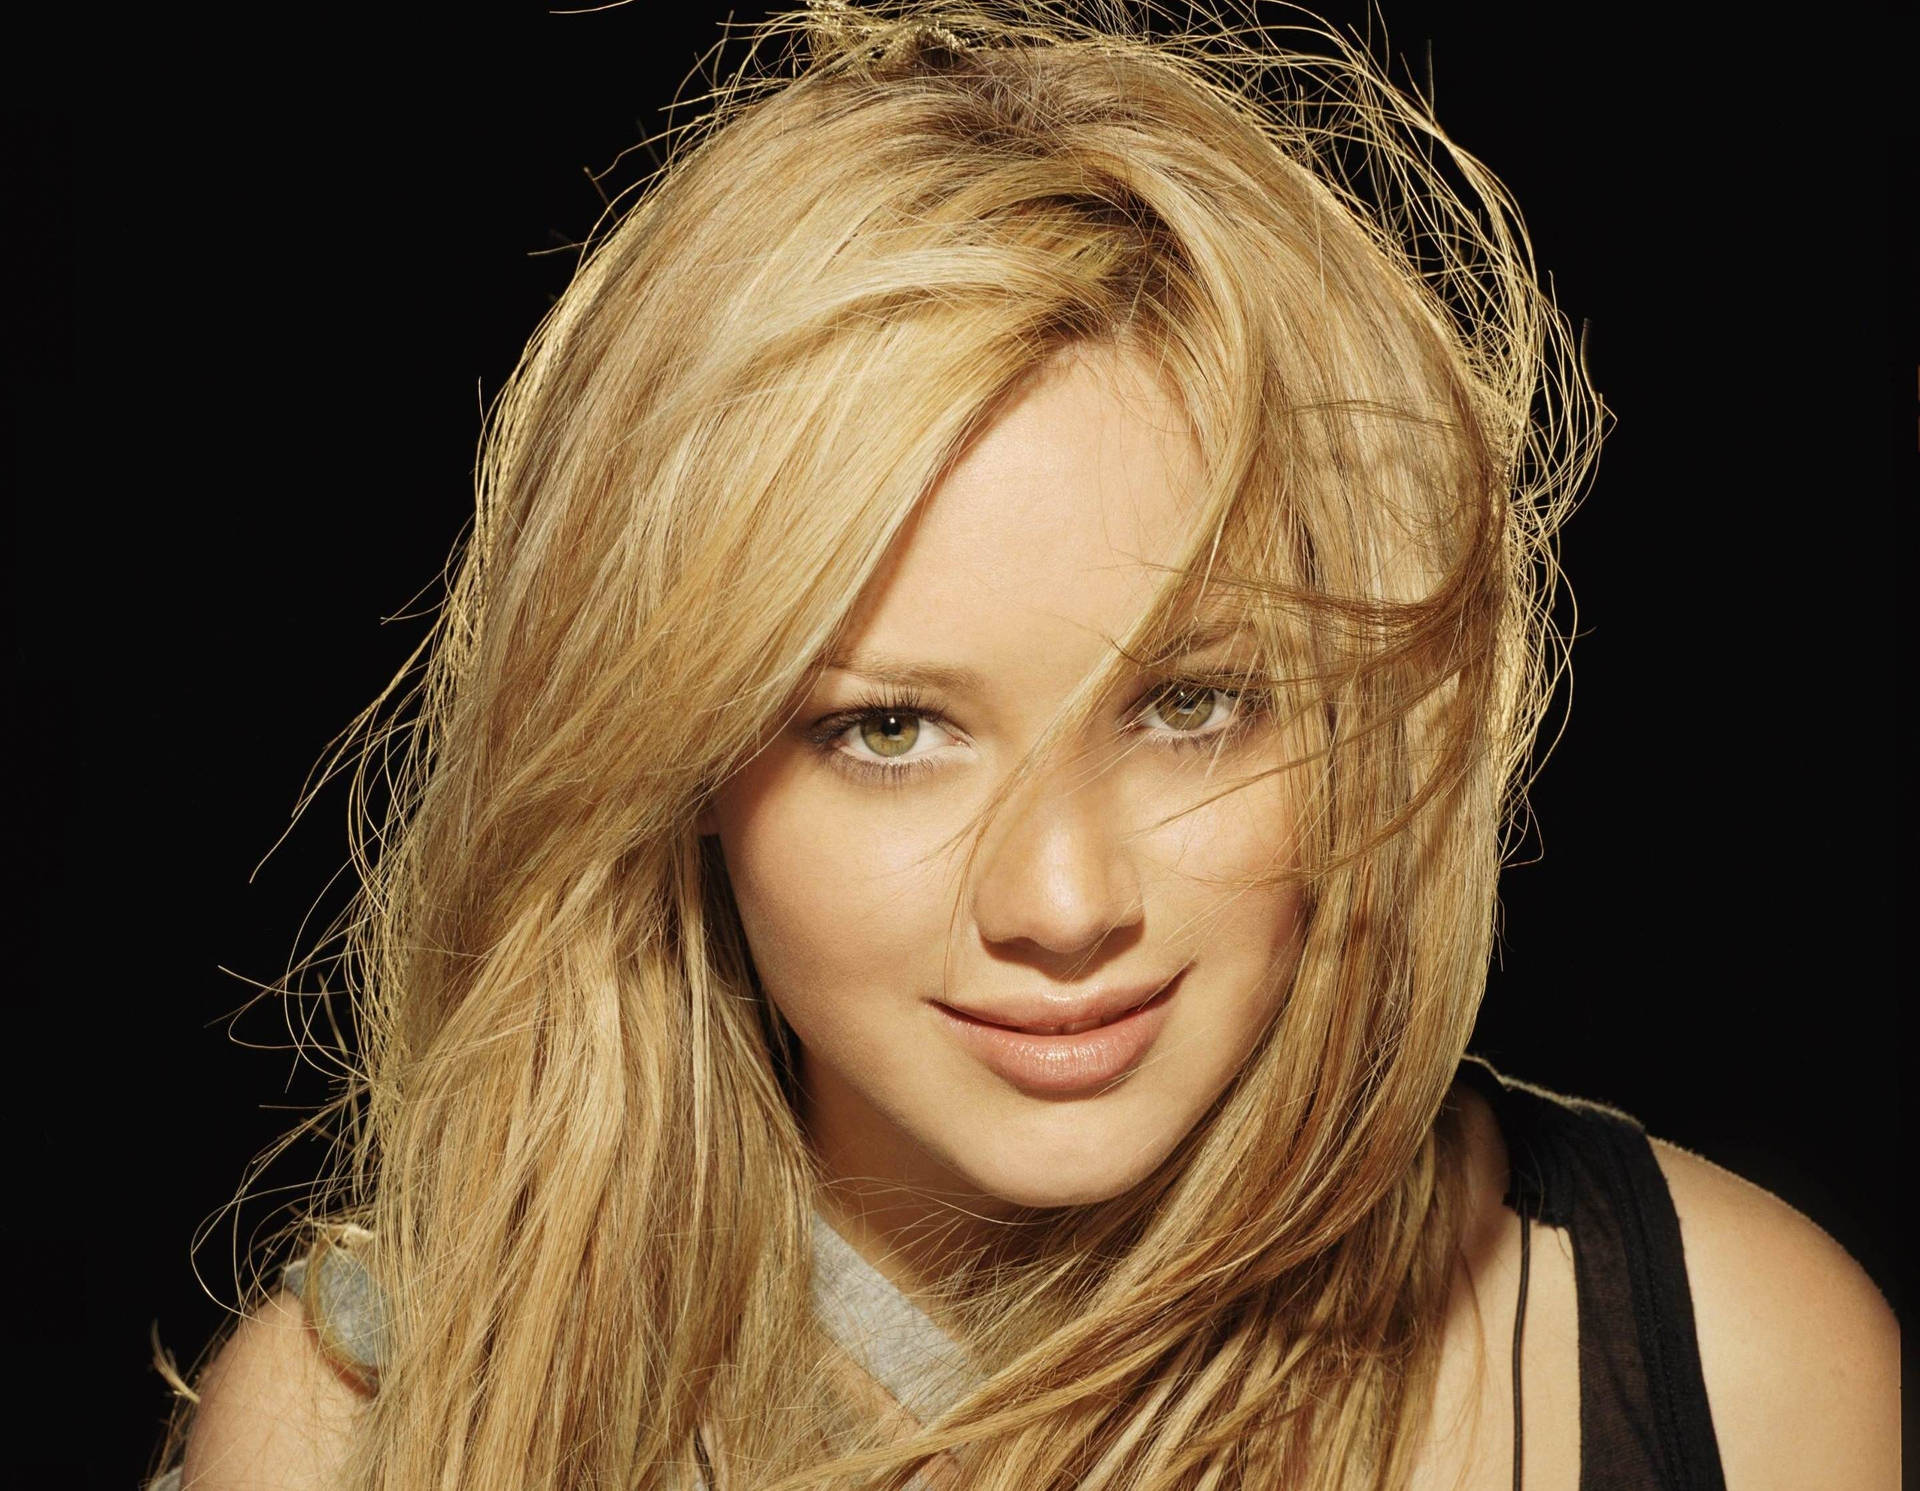 Hilary Duff With Black Backdrop Wallpaper